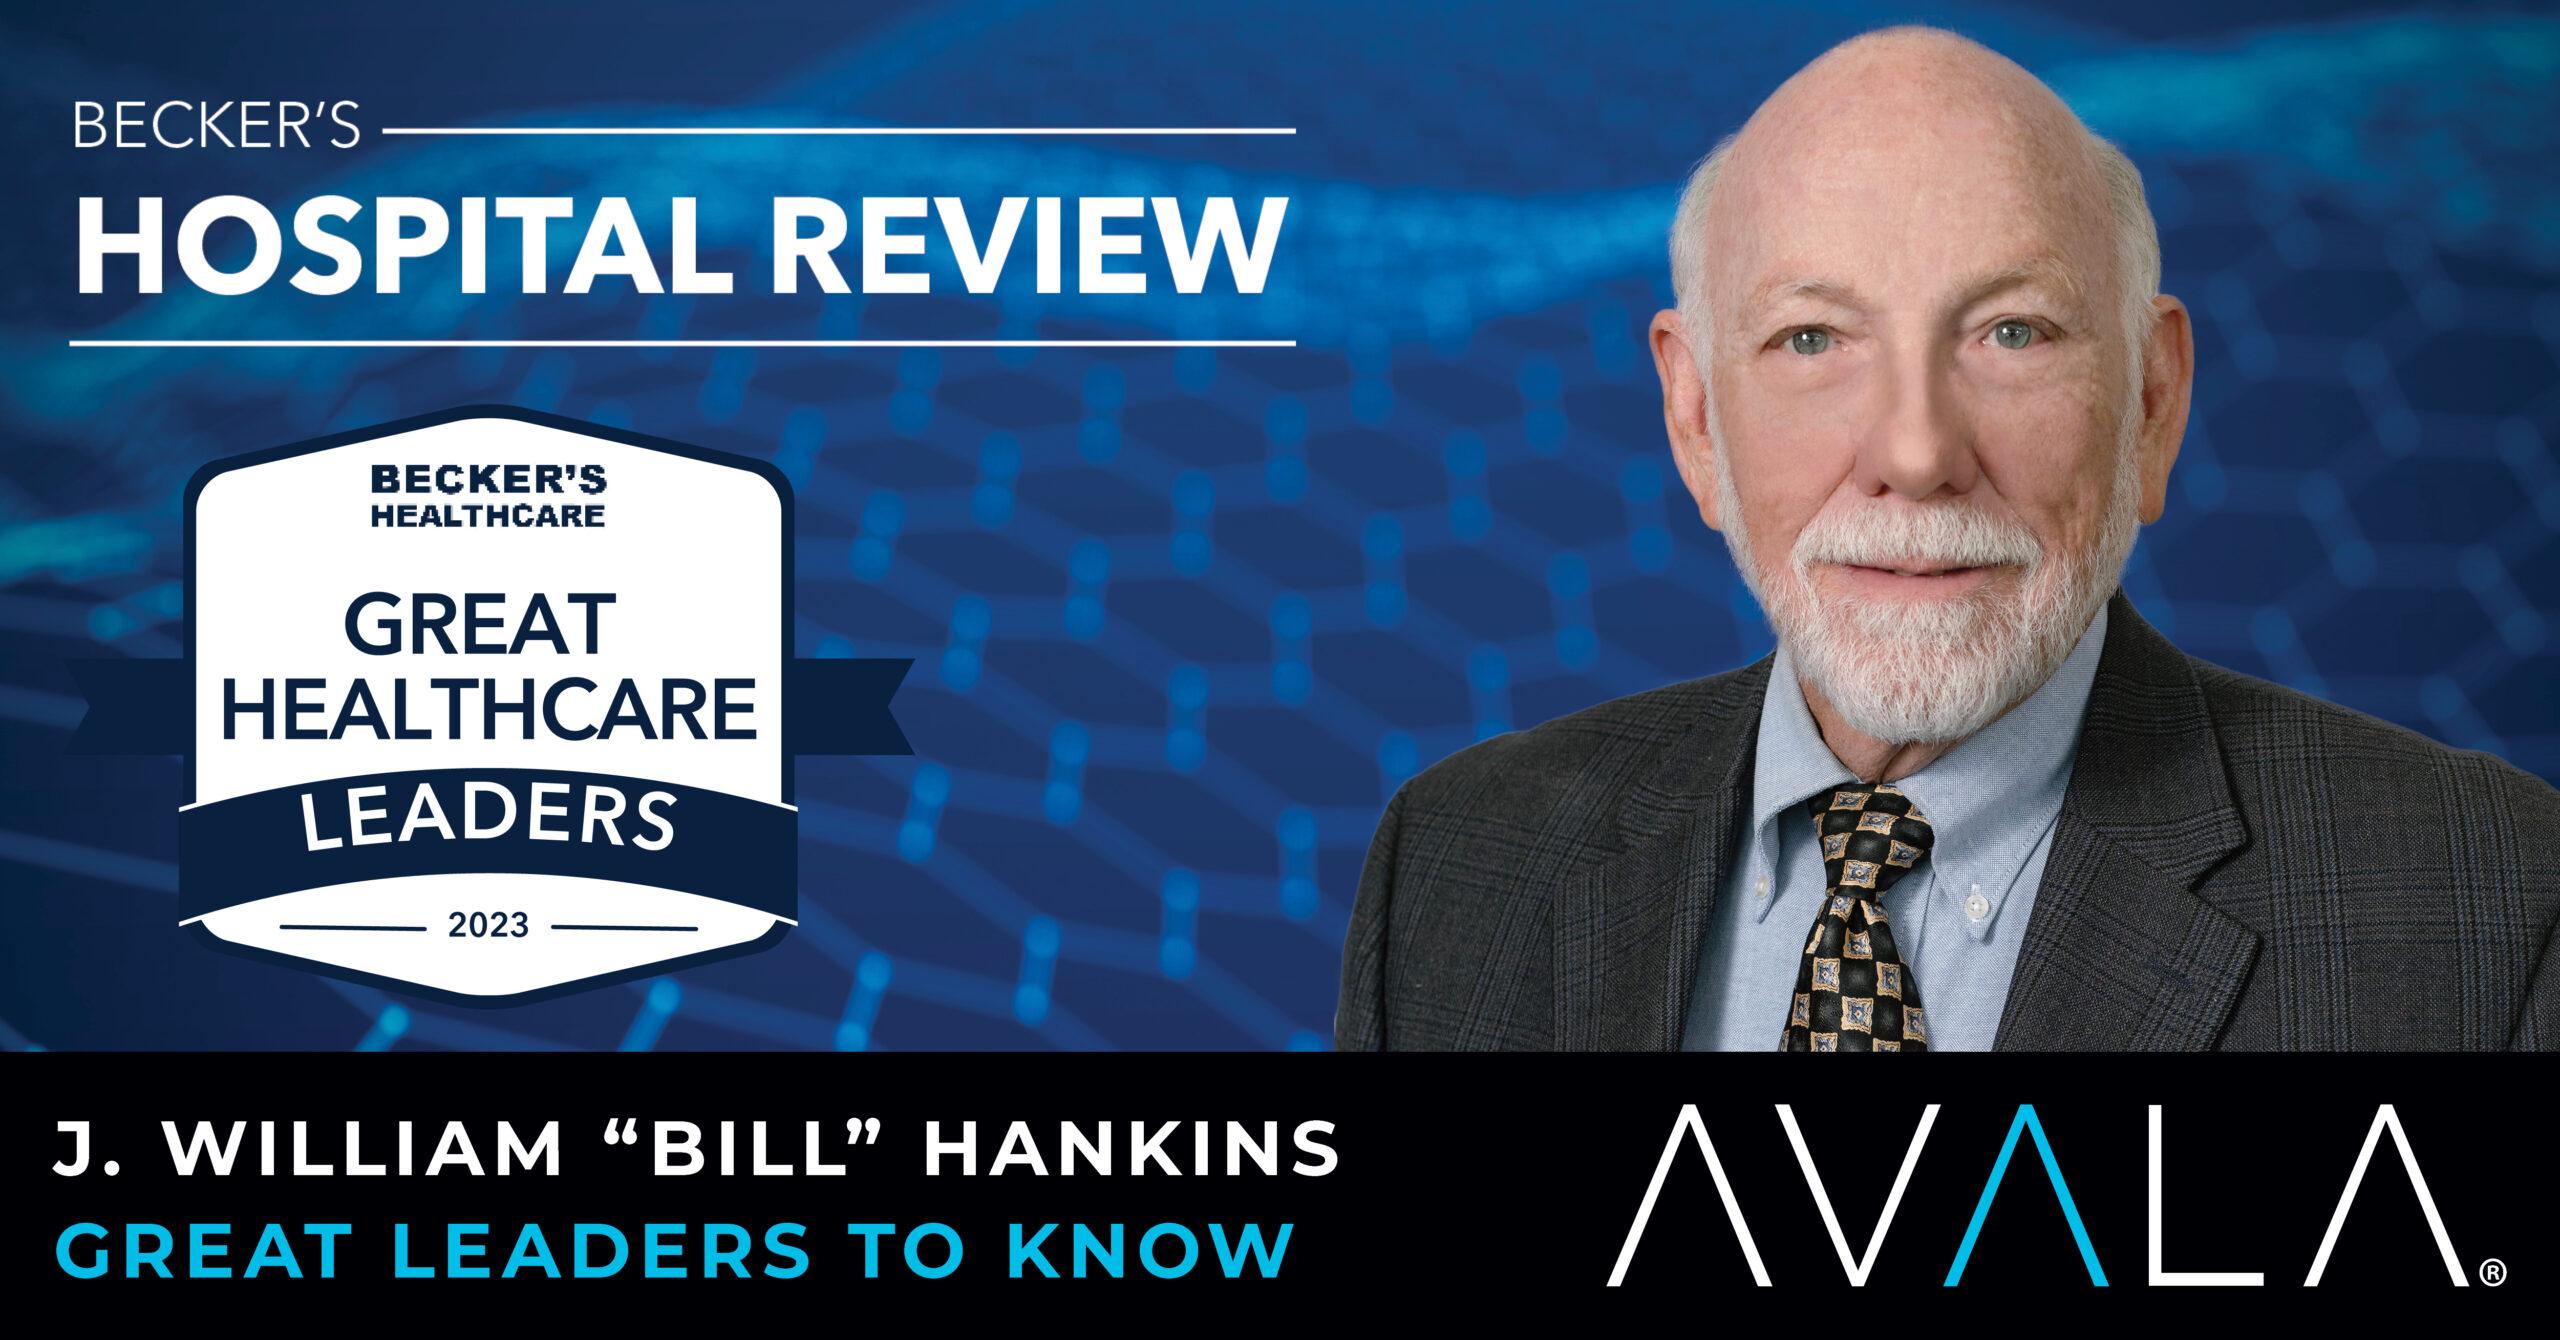 Beckers Review Great Healthcare Leaders to Know - Blog Post - AVALA 2023